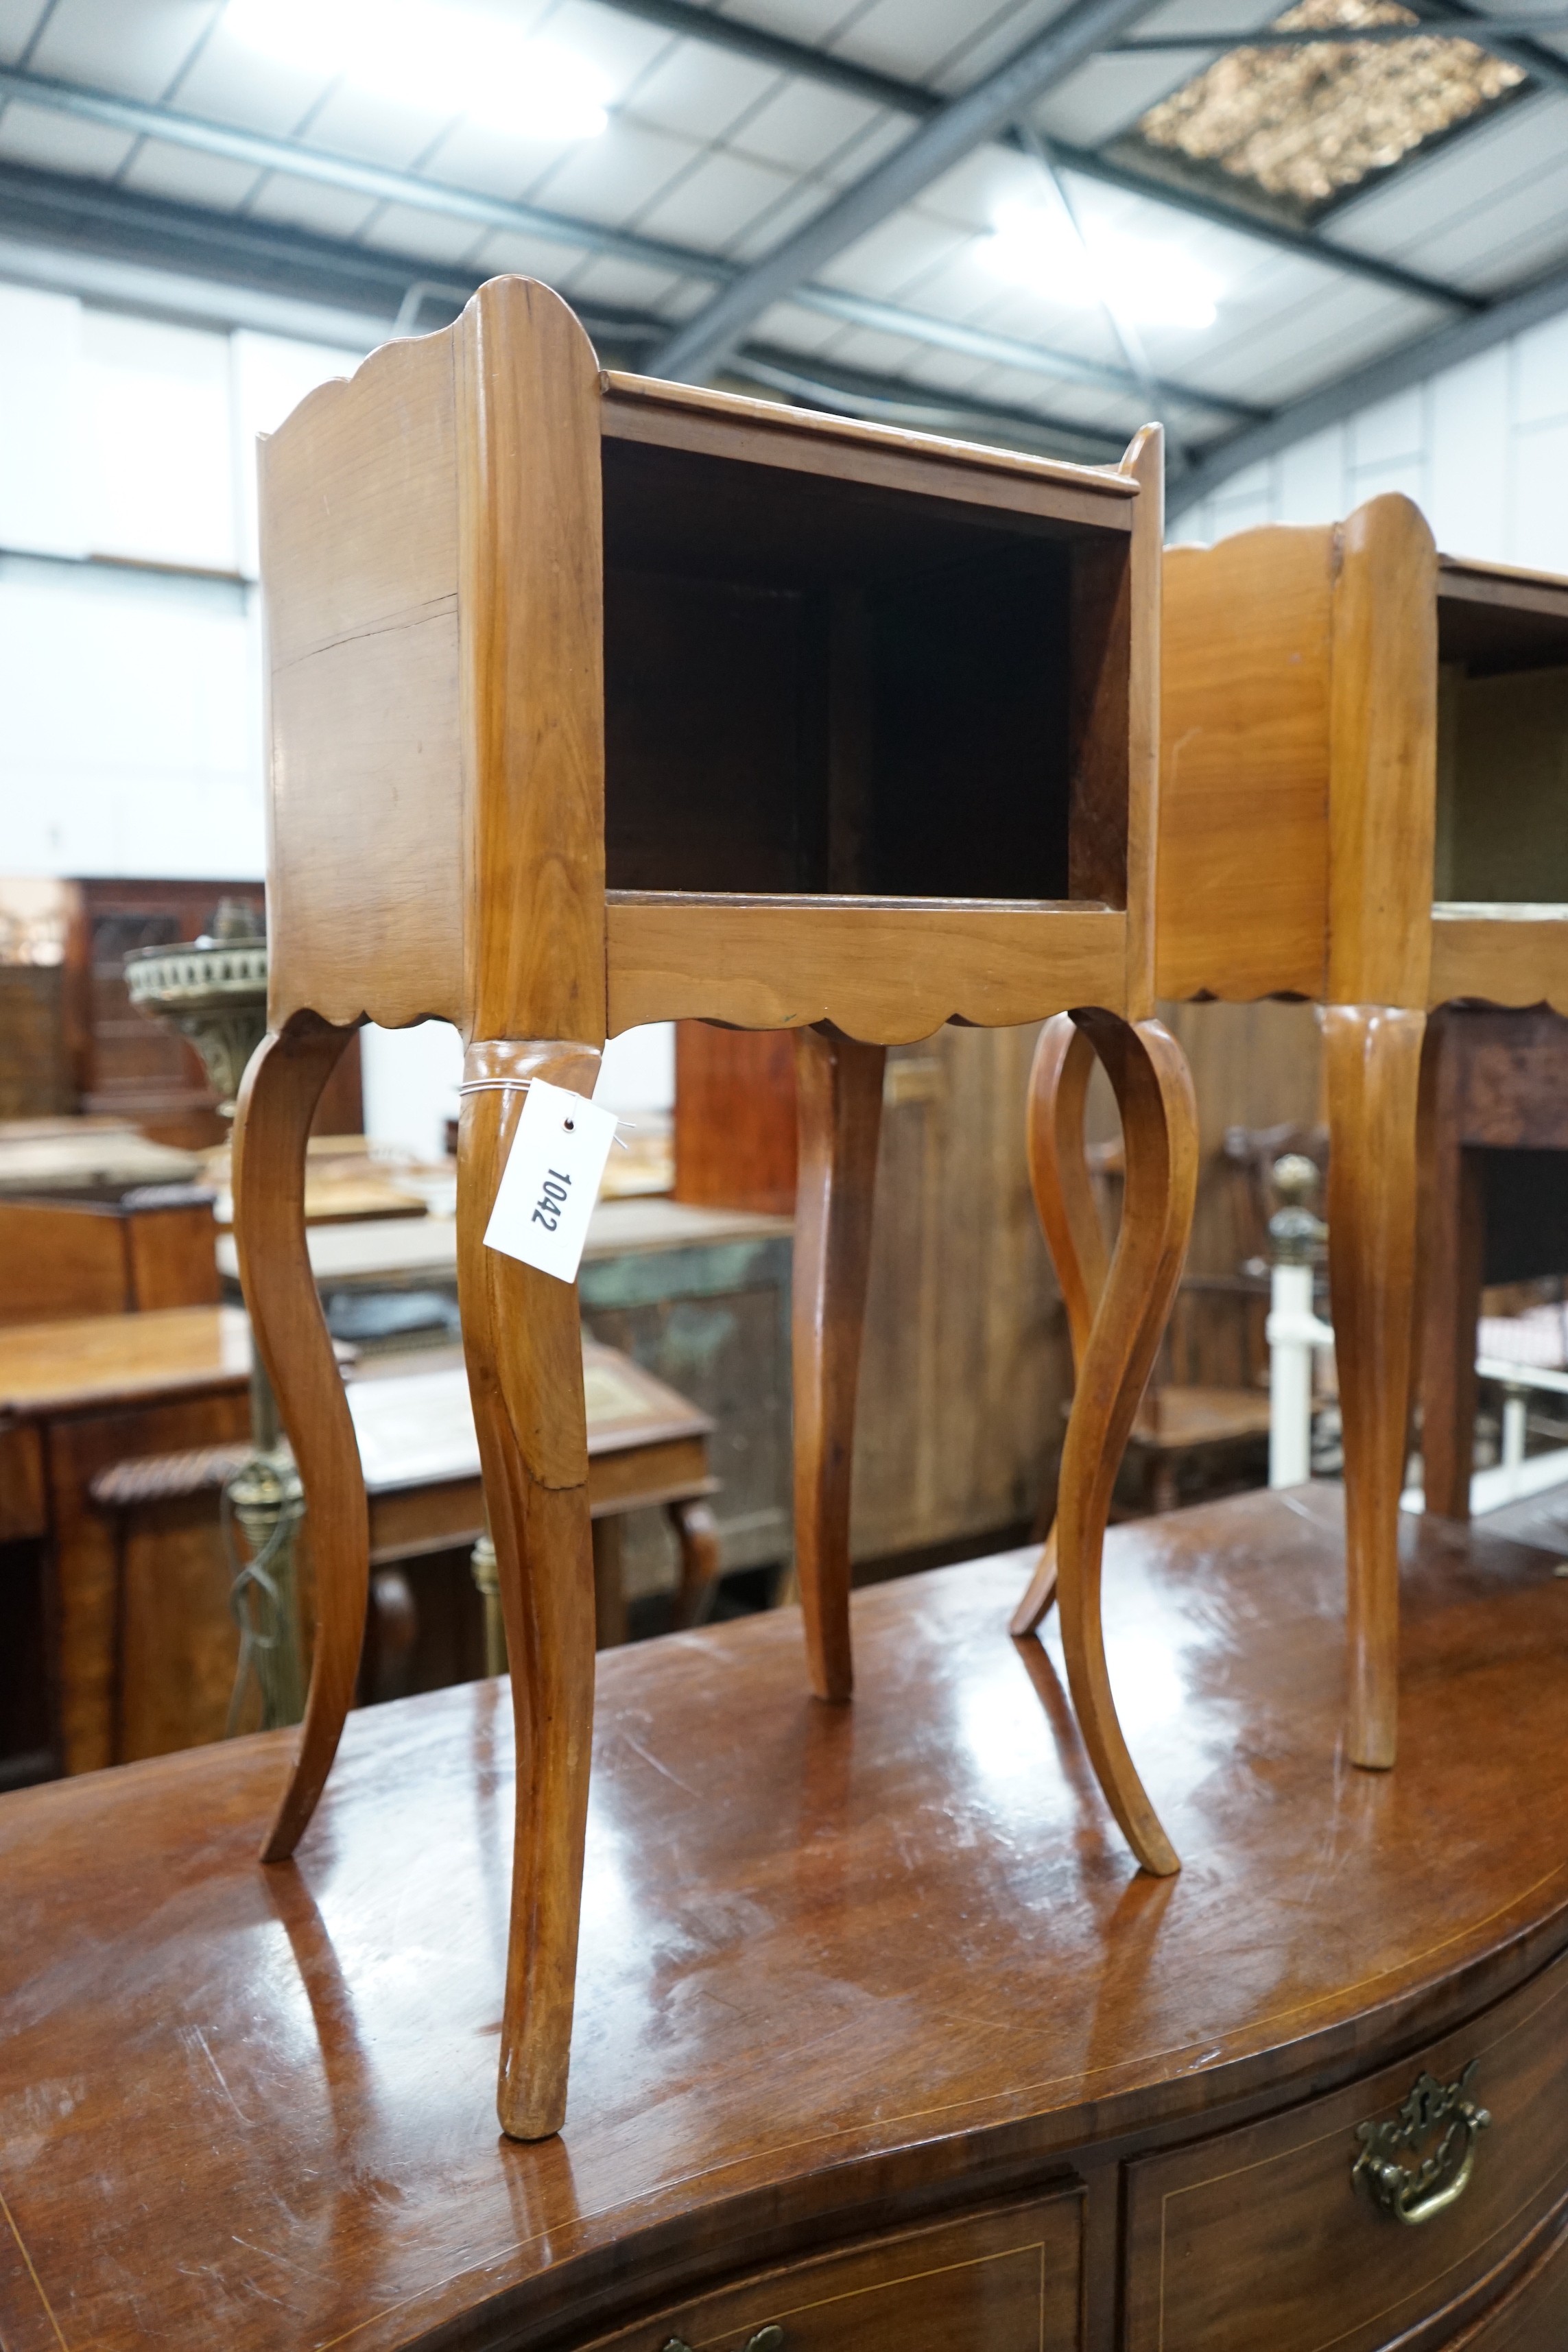 A pair of French style cherry bedside cabinets, width 37cm, depth 28cm, height 69cm